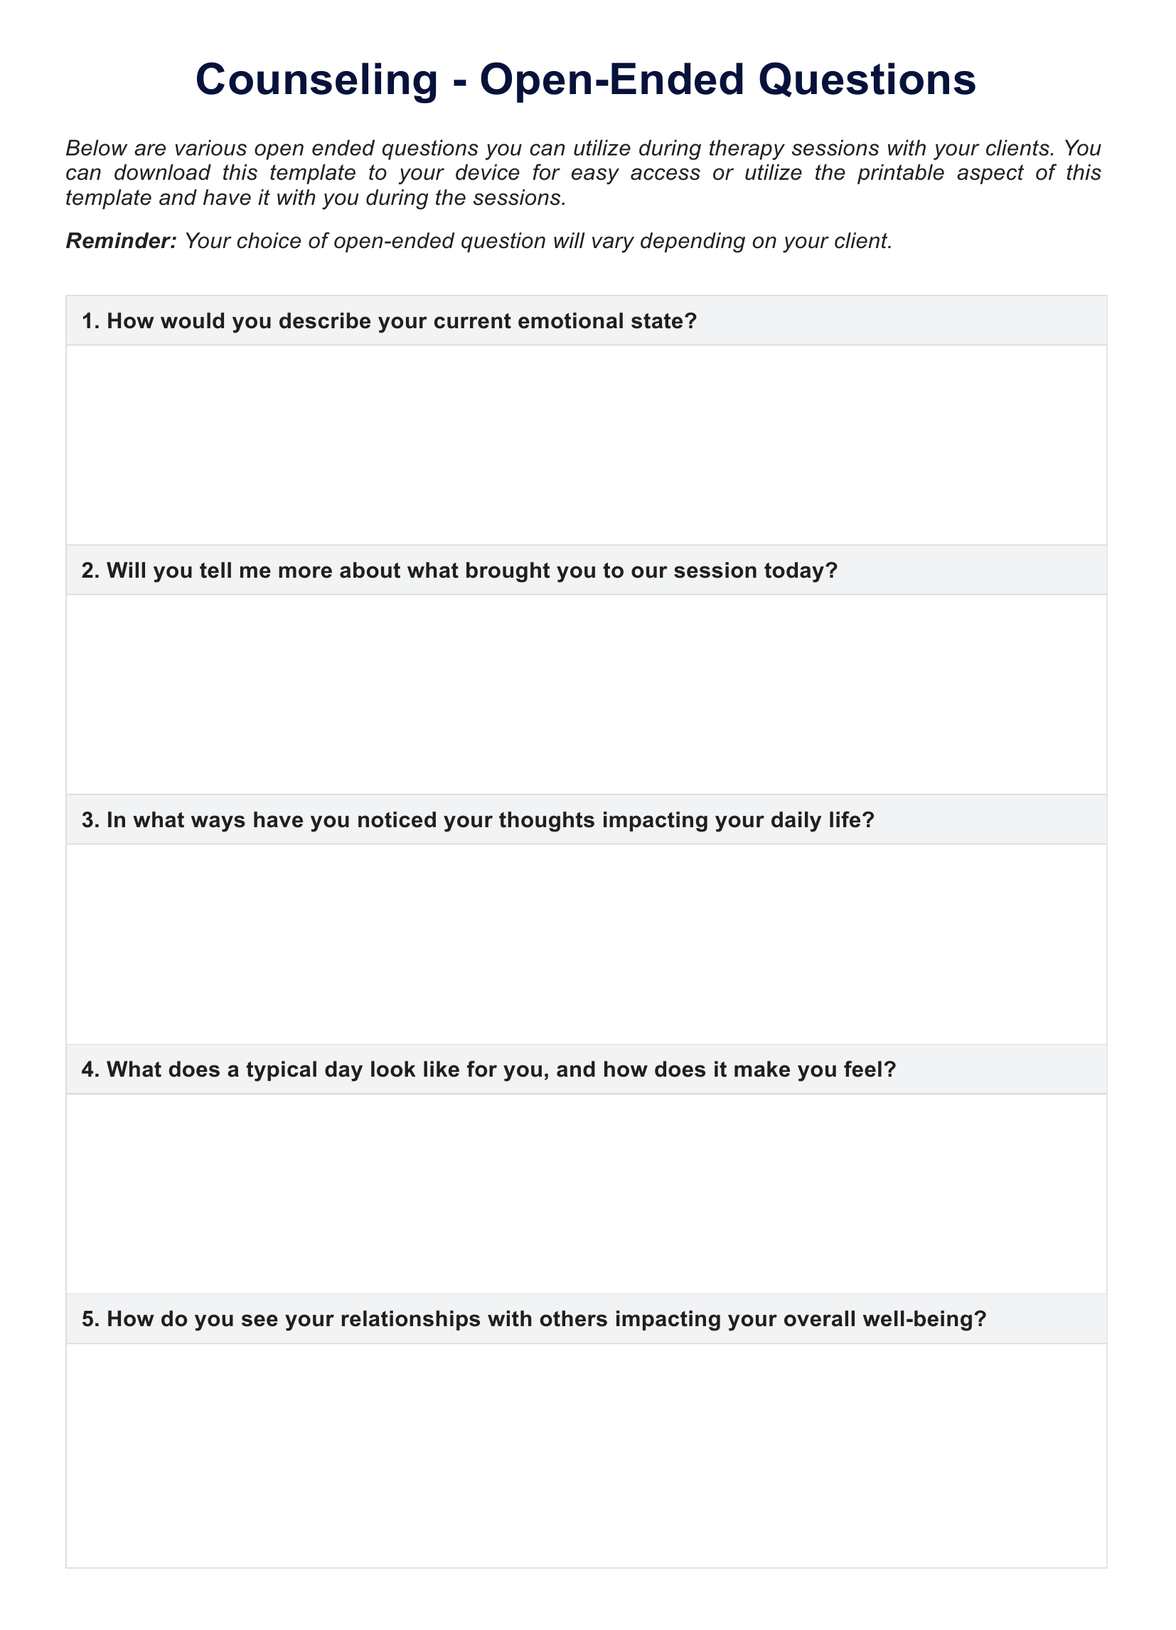 Counseling Open-Ended Questions PDF PDF Example